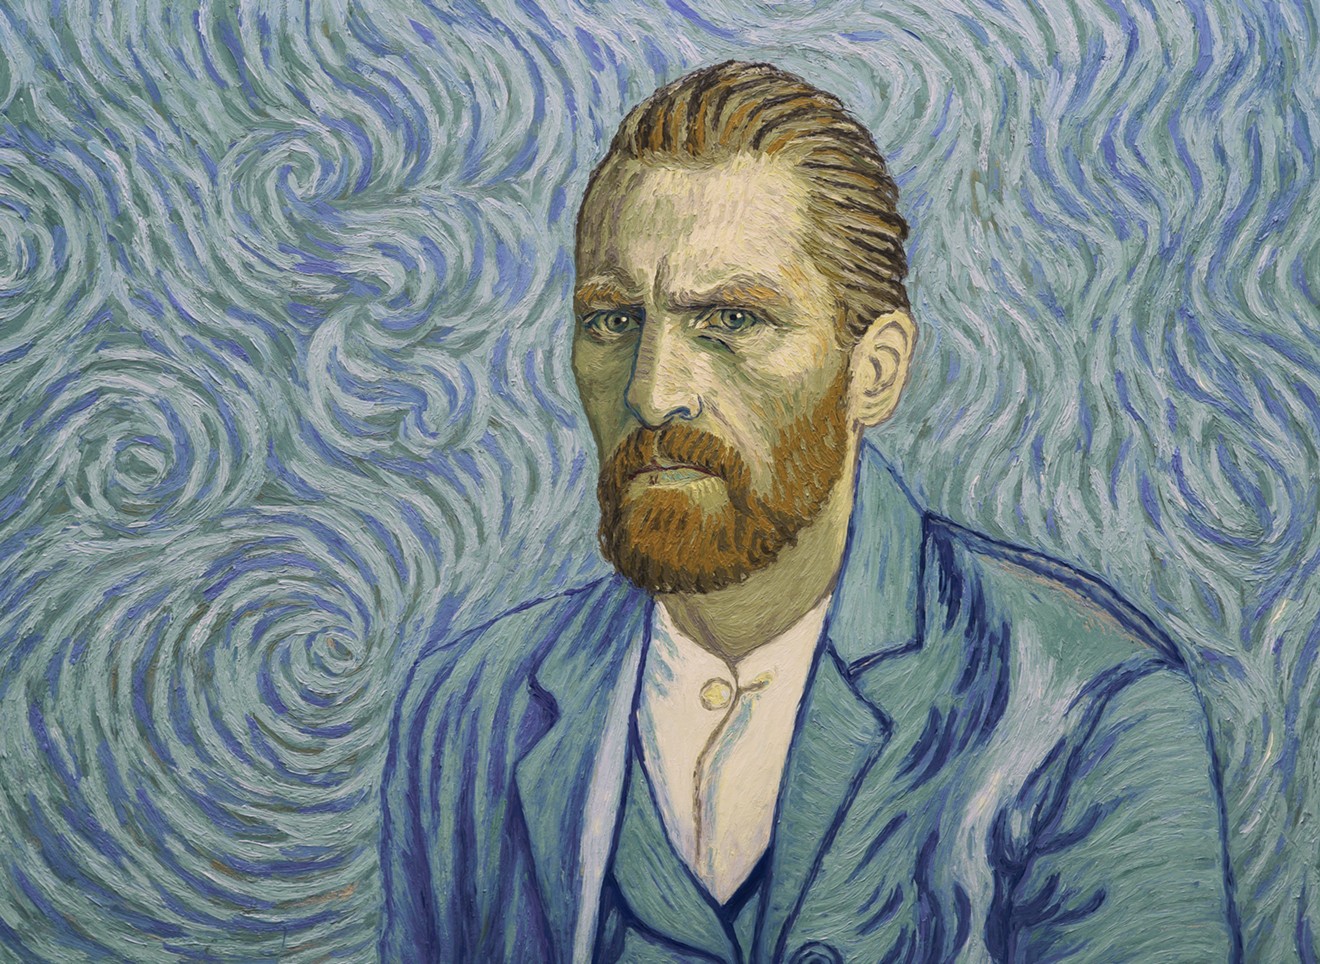 The film Loving Vincent, made by animating hand-painted frames by more than 100 artists, has already garnered a Golden Globe nomination.